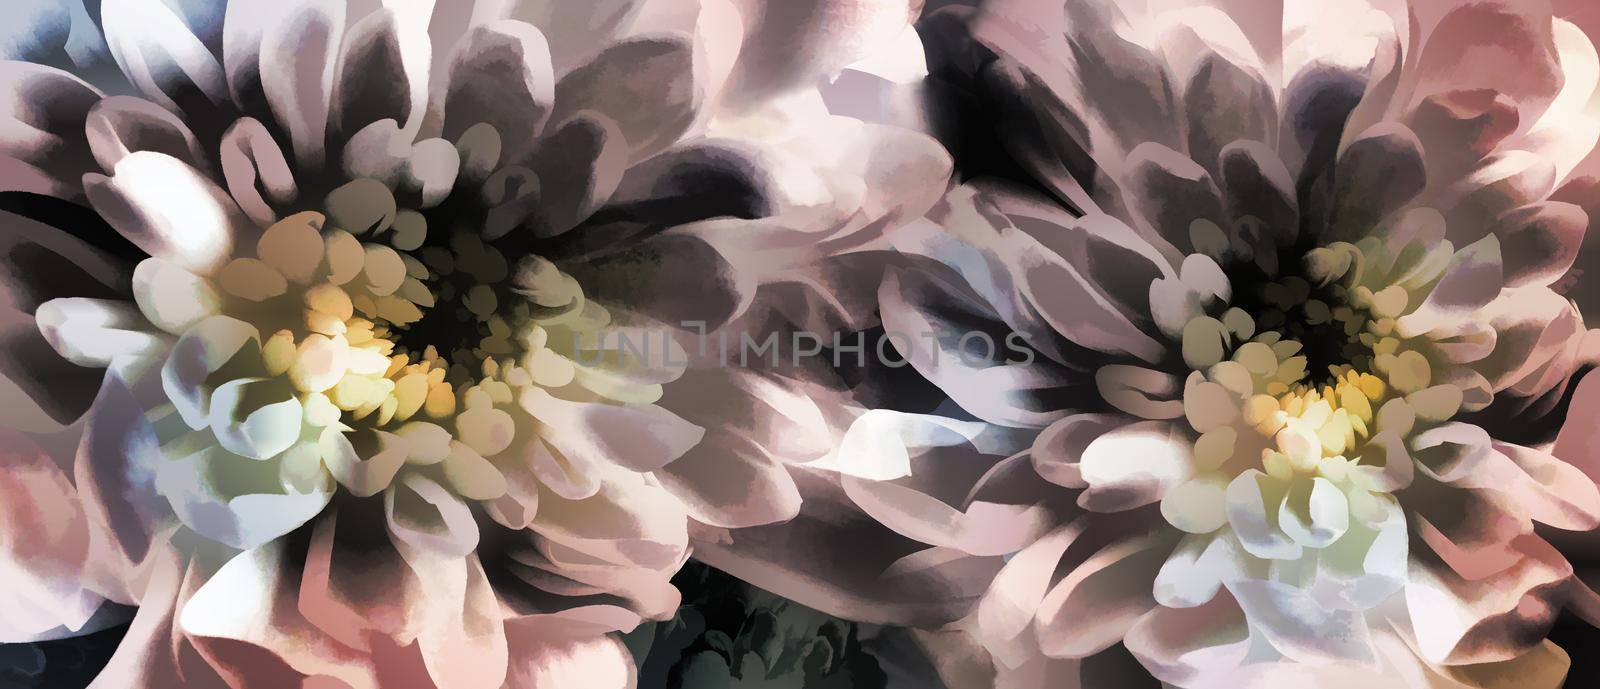 Blooming chrysanthemums in an abstract close-up style. by georgina198